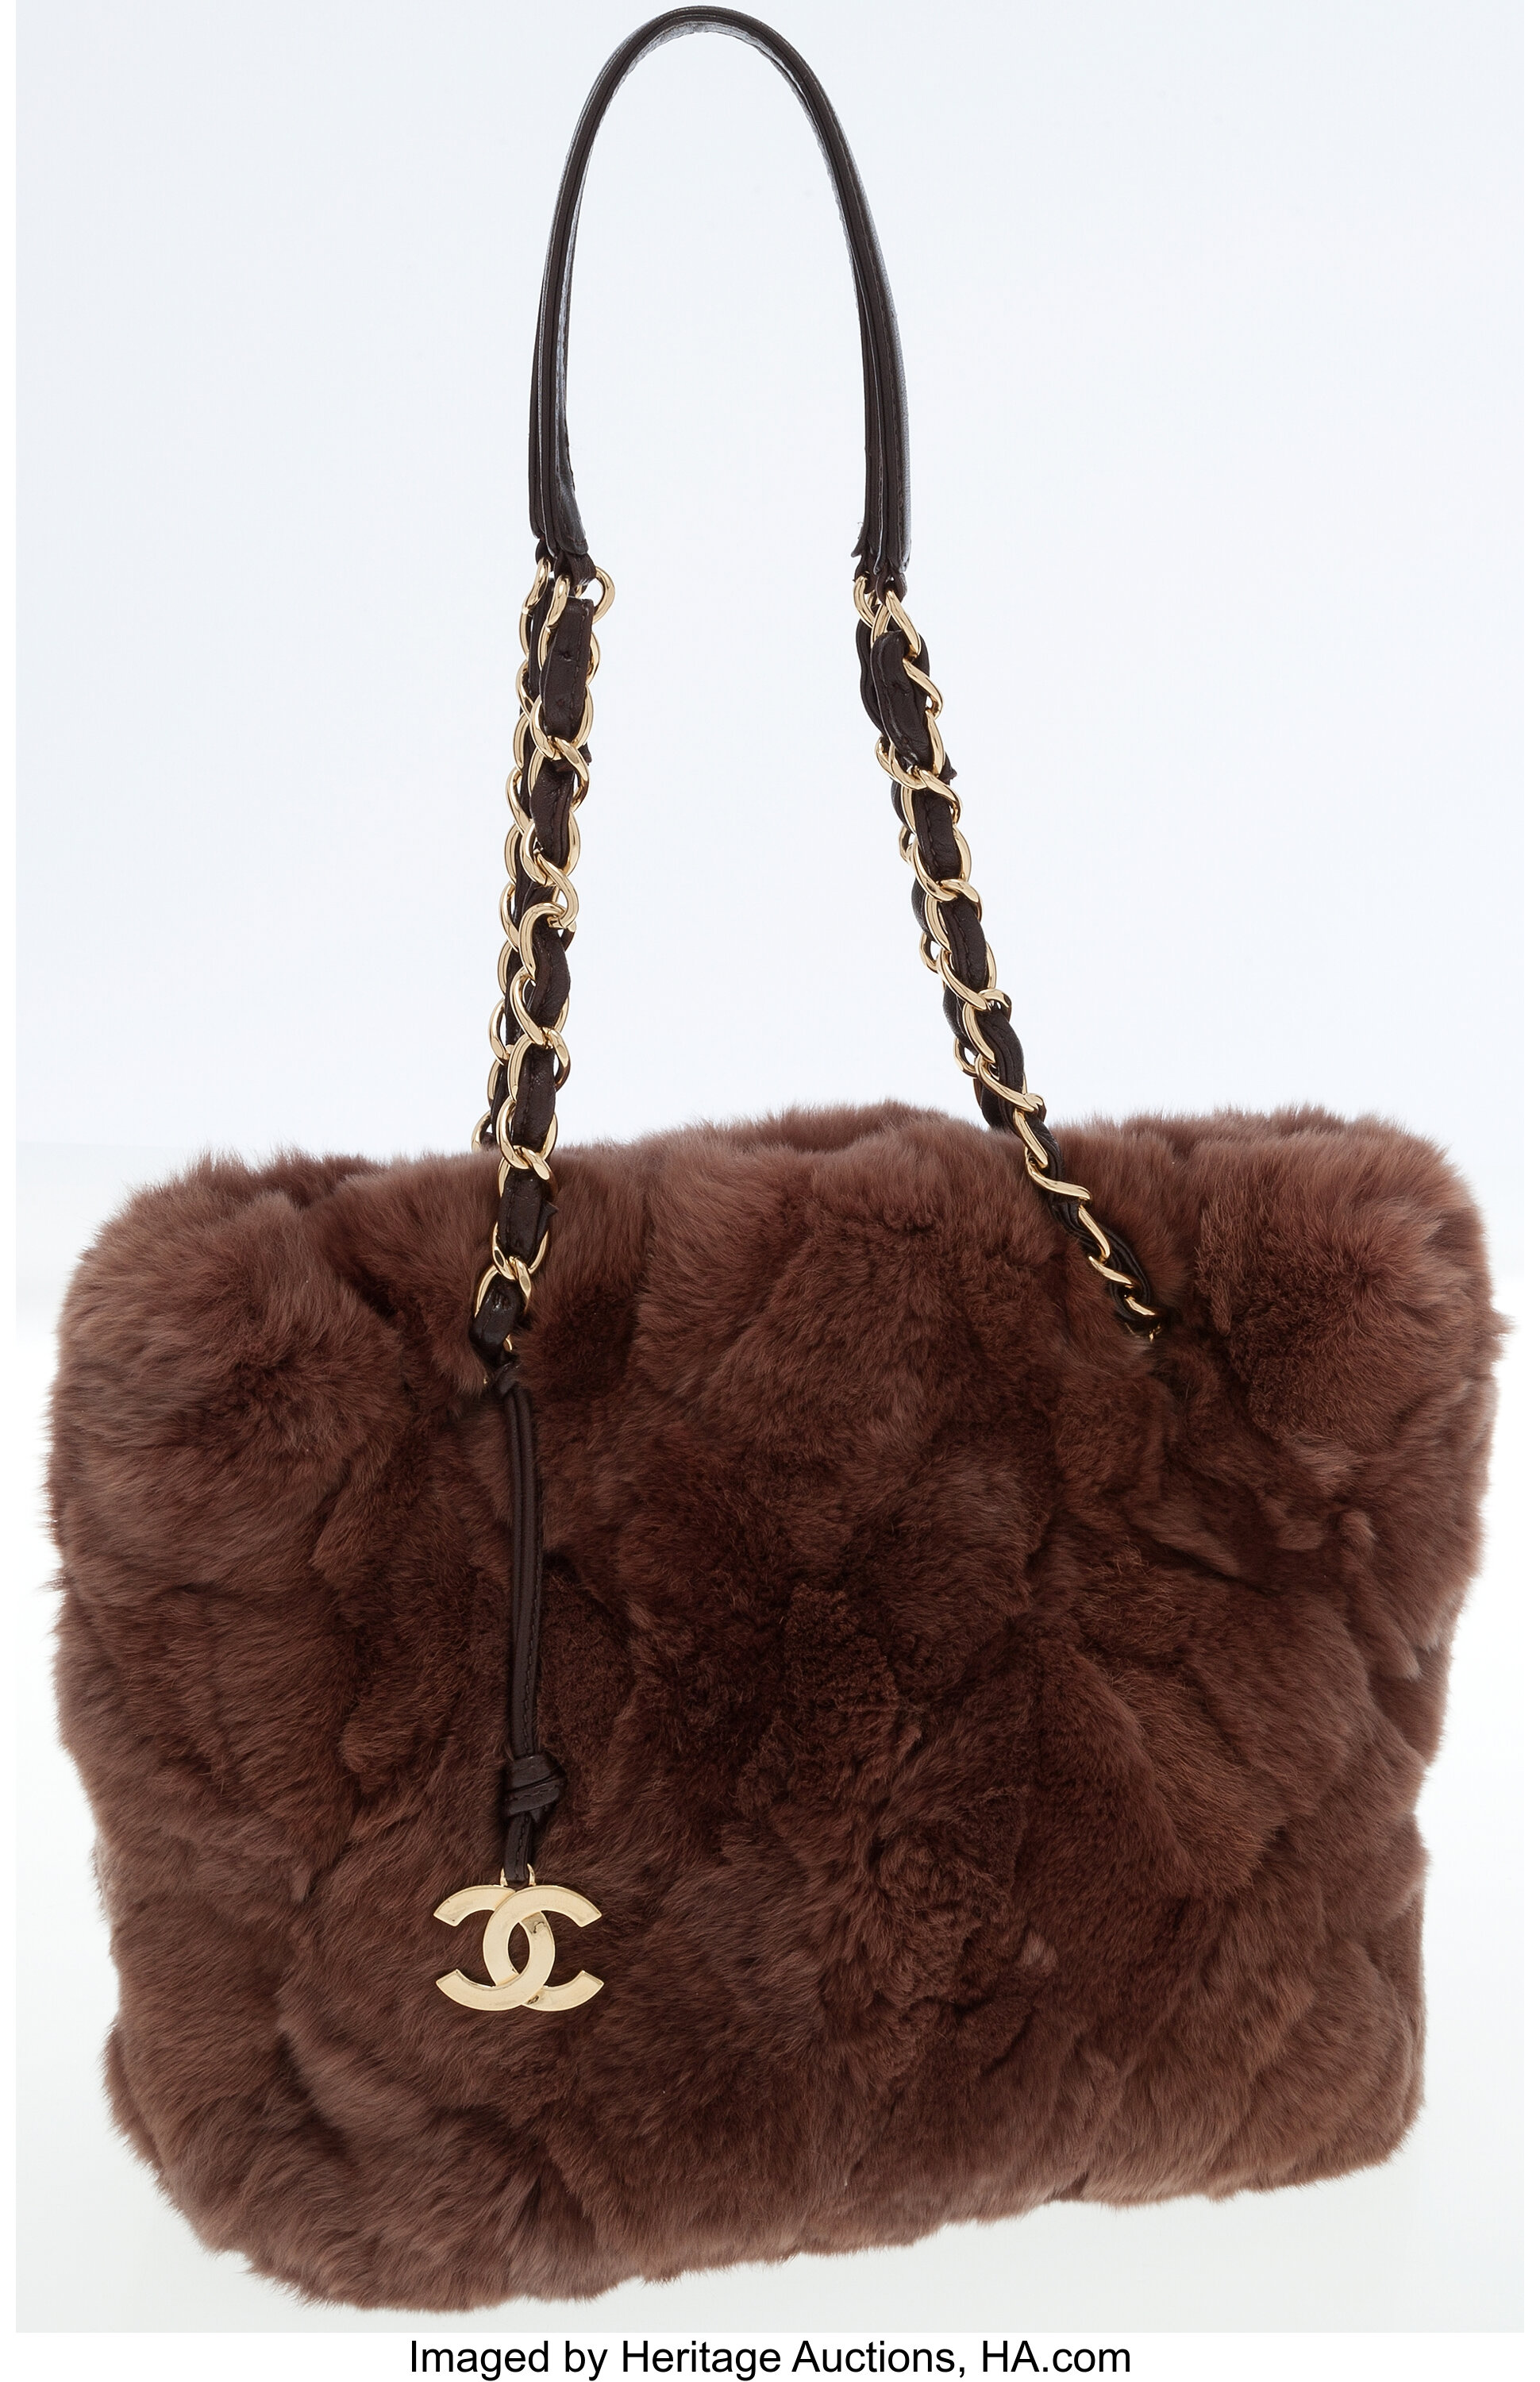 Chanel Brown Rabbit Fur Shoulder Bag with Leather and Chain Straps